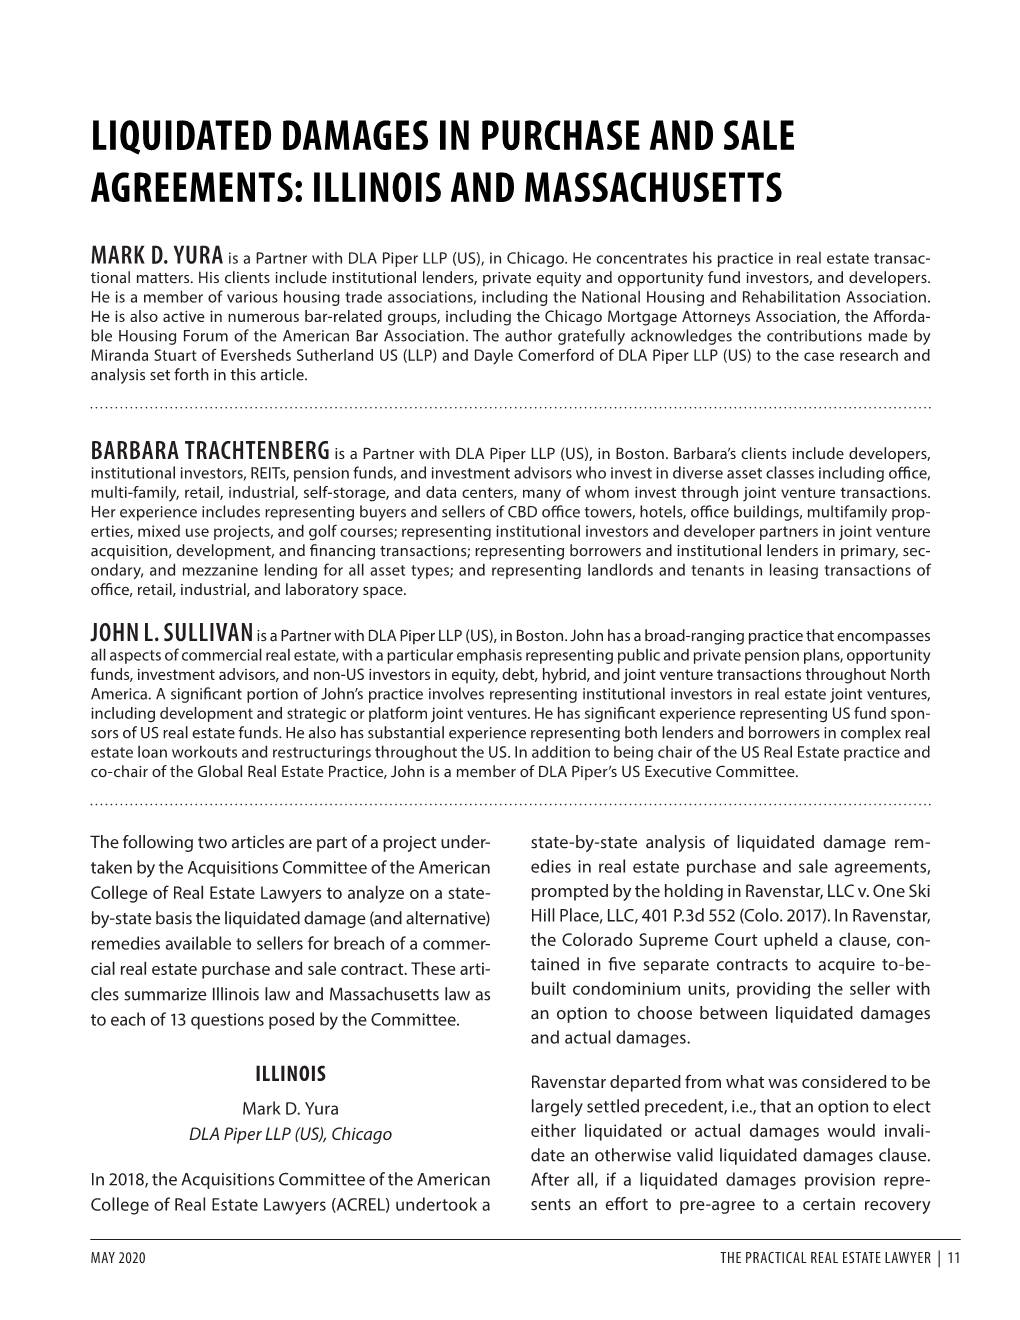 Liquidated Damages in Purchase and Sale Agreements: Illinois and Massachusetts